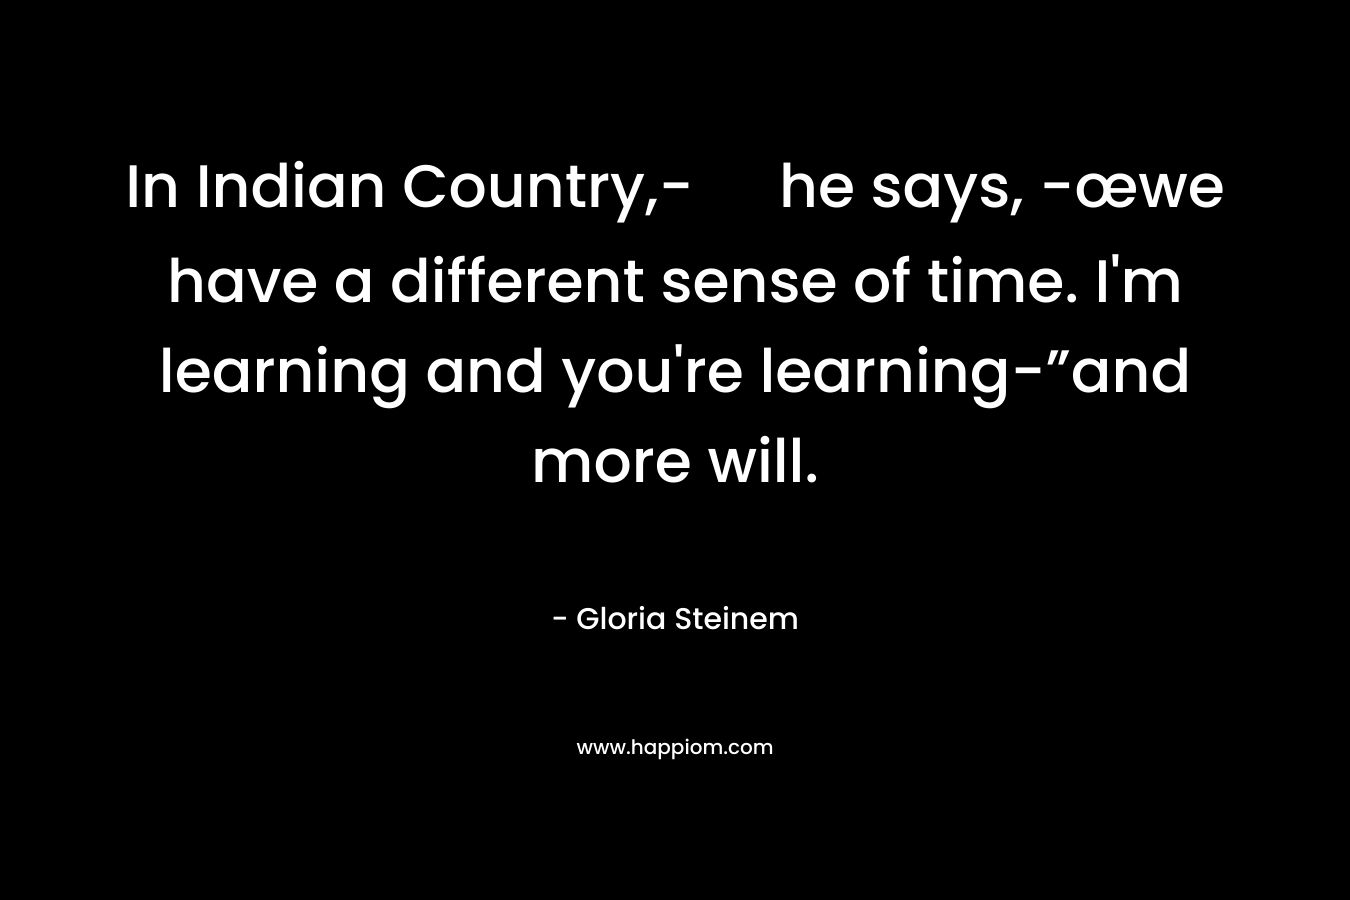 In Indian Country,- he says, -œwe have a different sense of time. I'm learning and you're learning-”and more will.